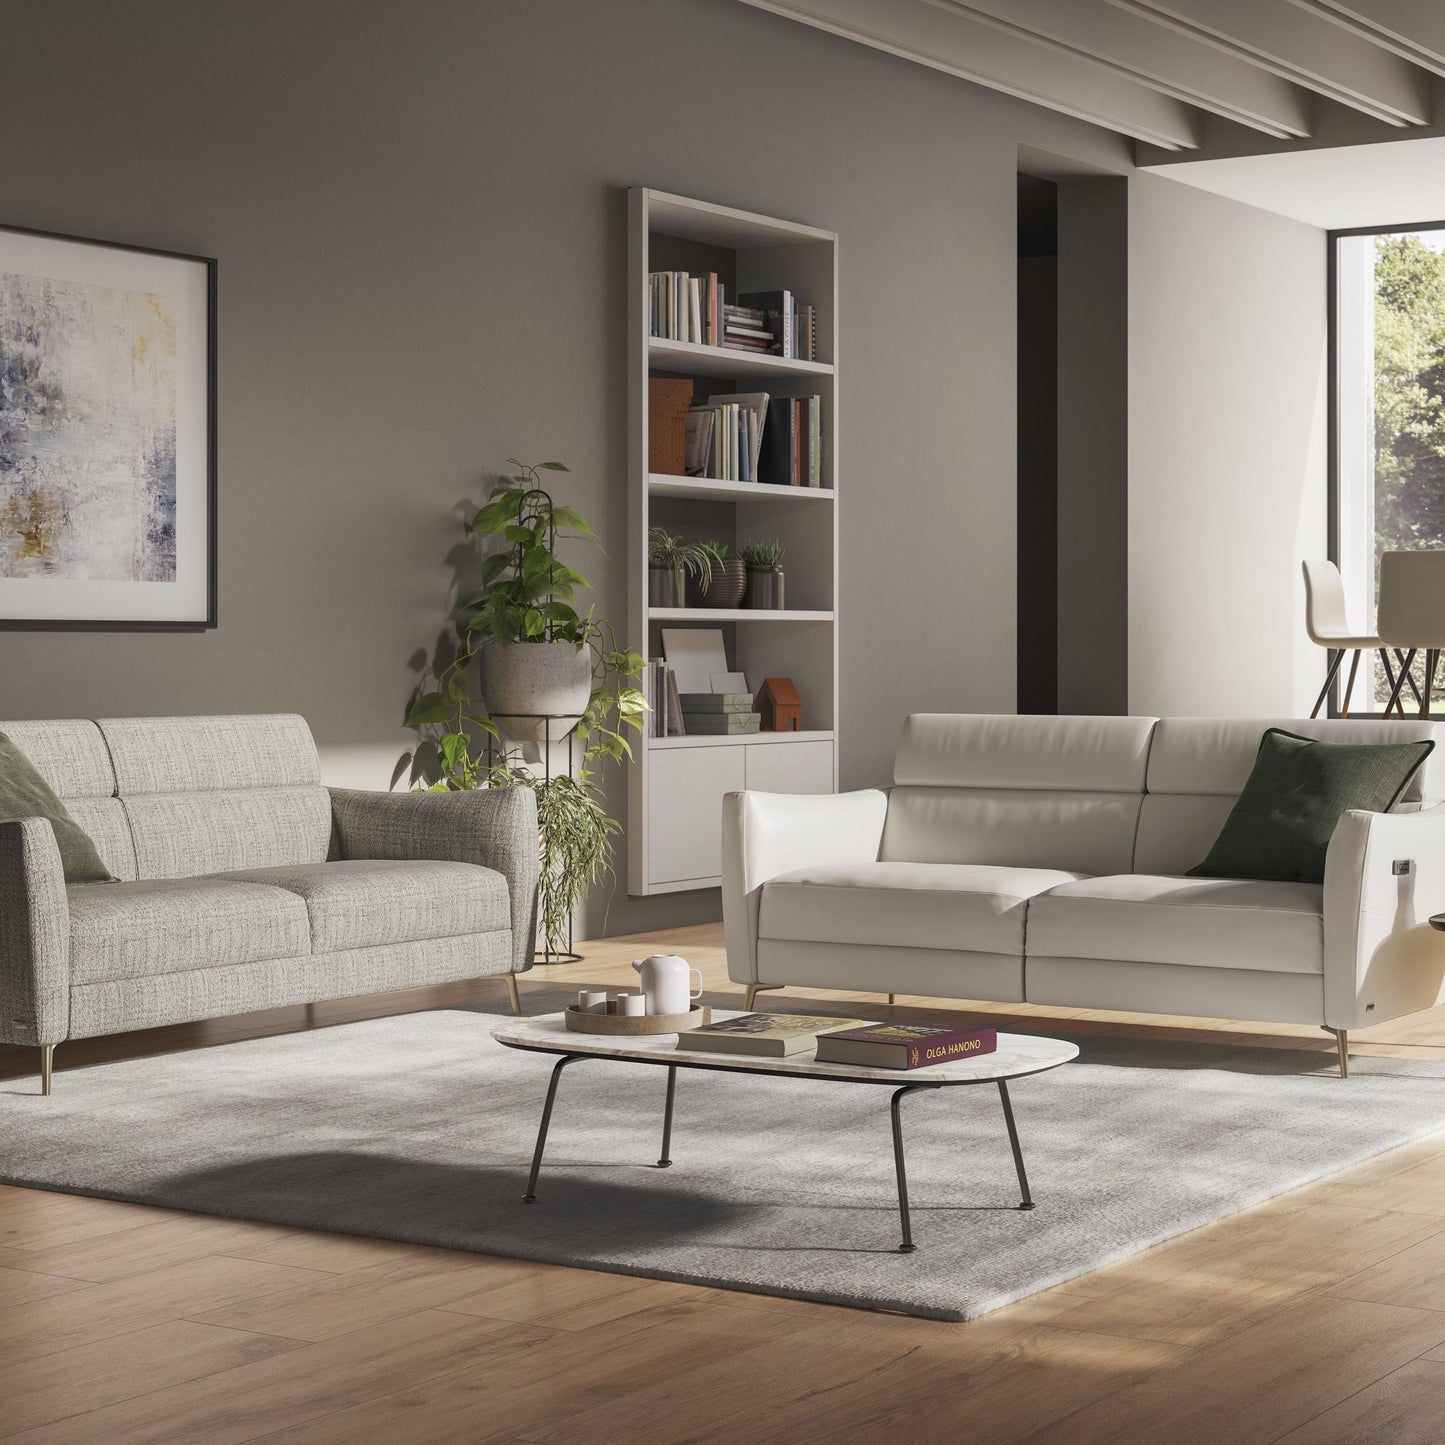 Natuzzi Editions Greg C200 Modular Sofa. Available from your Natuzzi Stockist Make Your House A Home, Bendigo, Victoria. Australia wide delivery to Melbourne. Italian leather.